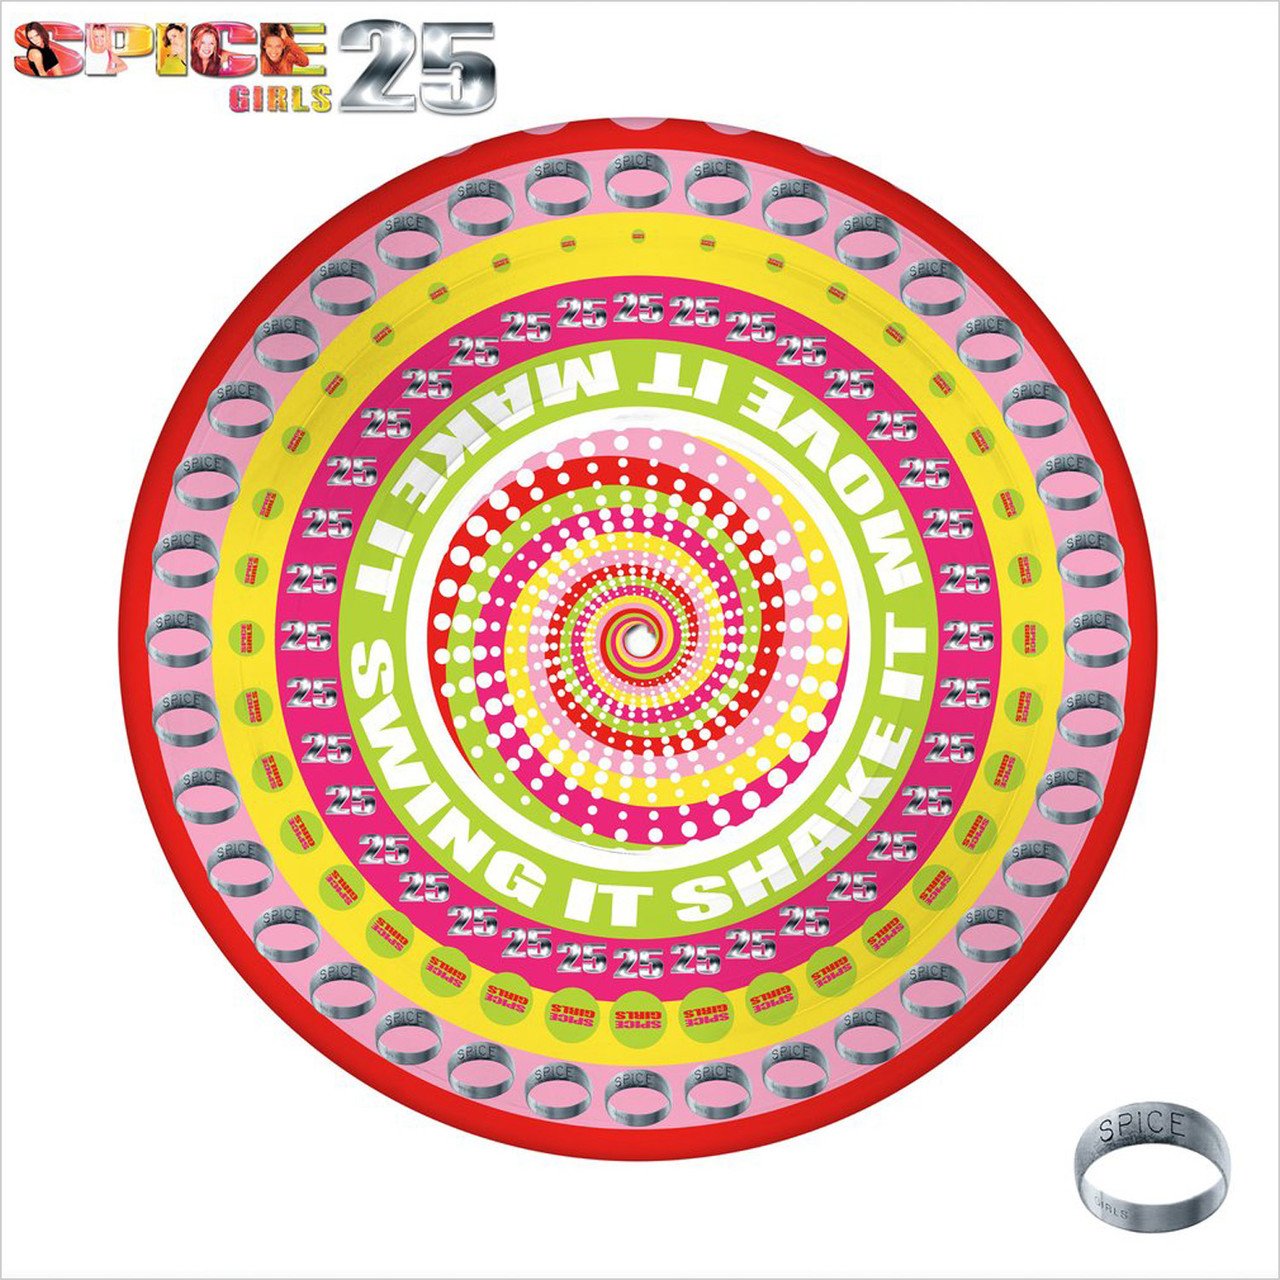 Spice Girls – Spice (25th Anniversary Limited Edition, Picture Disc,  Zoetrope Vinyl)